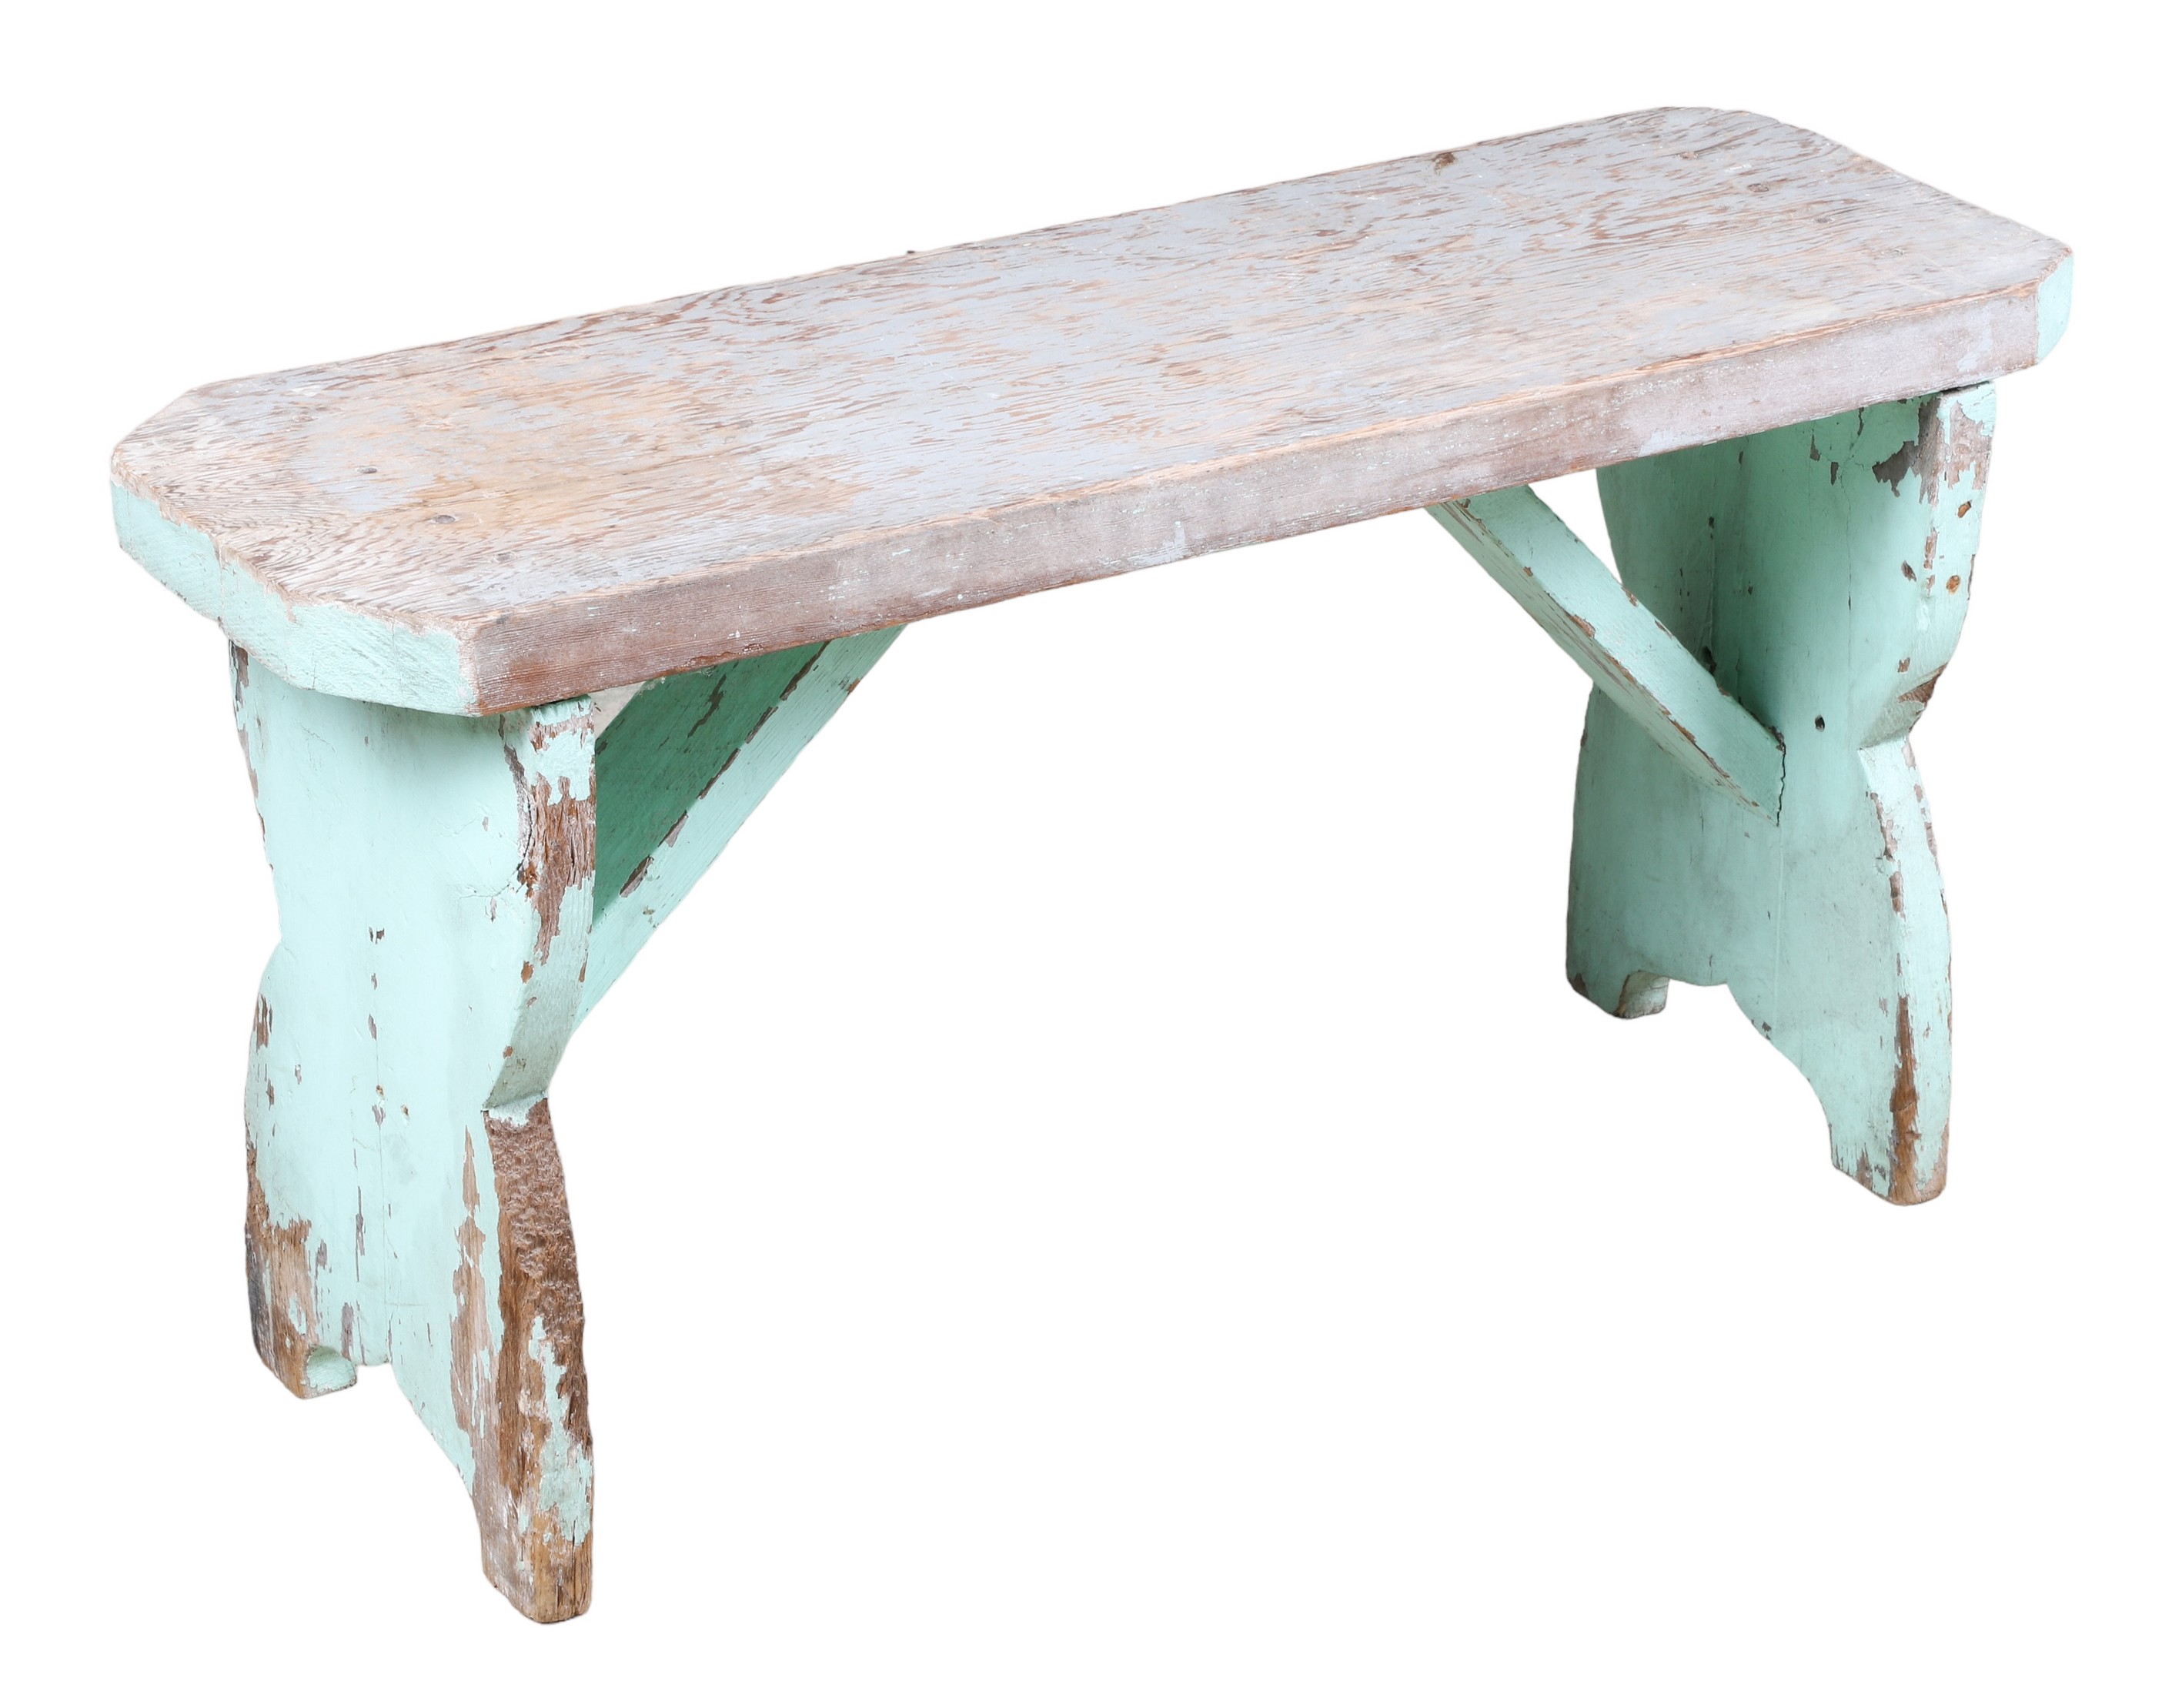 Painted waterbench, turquoise painted,